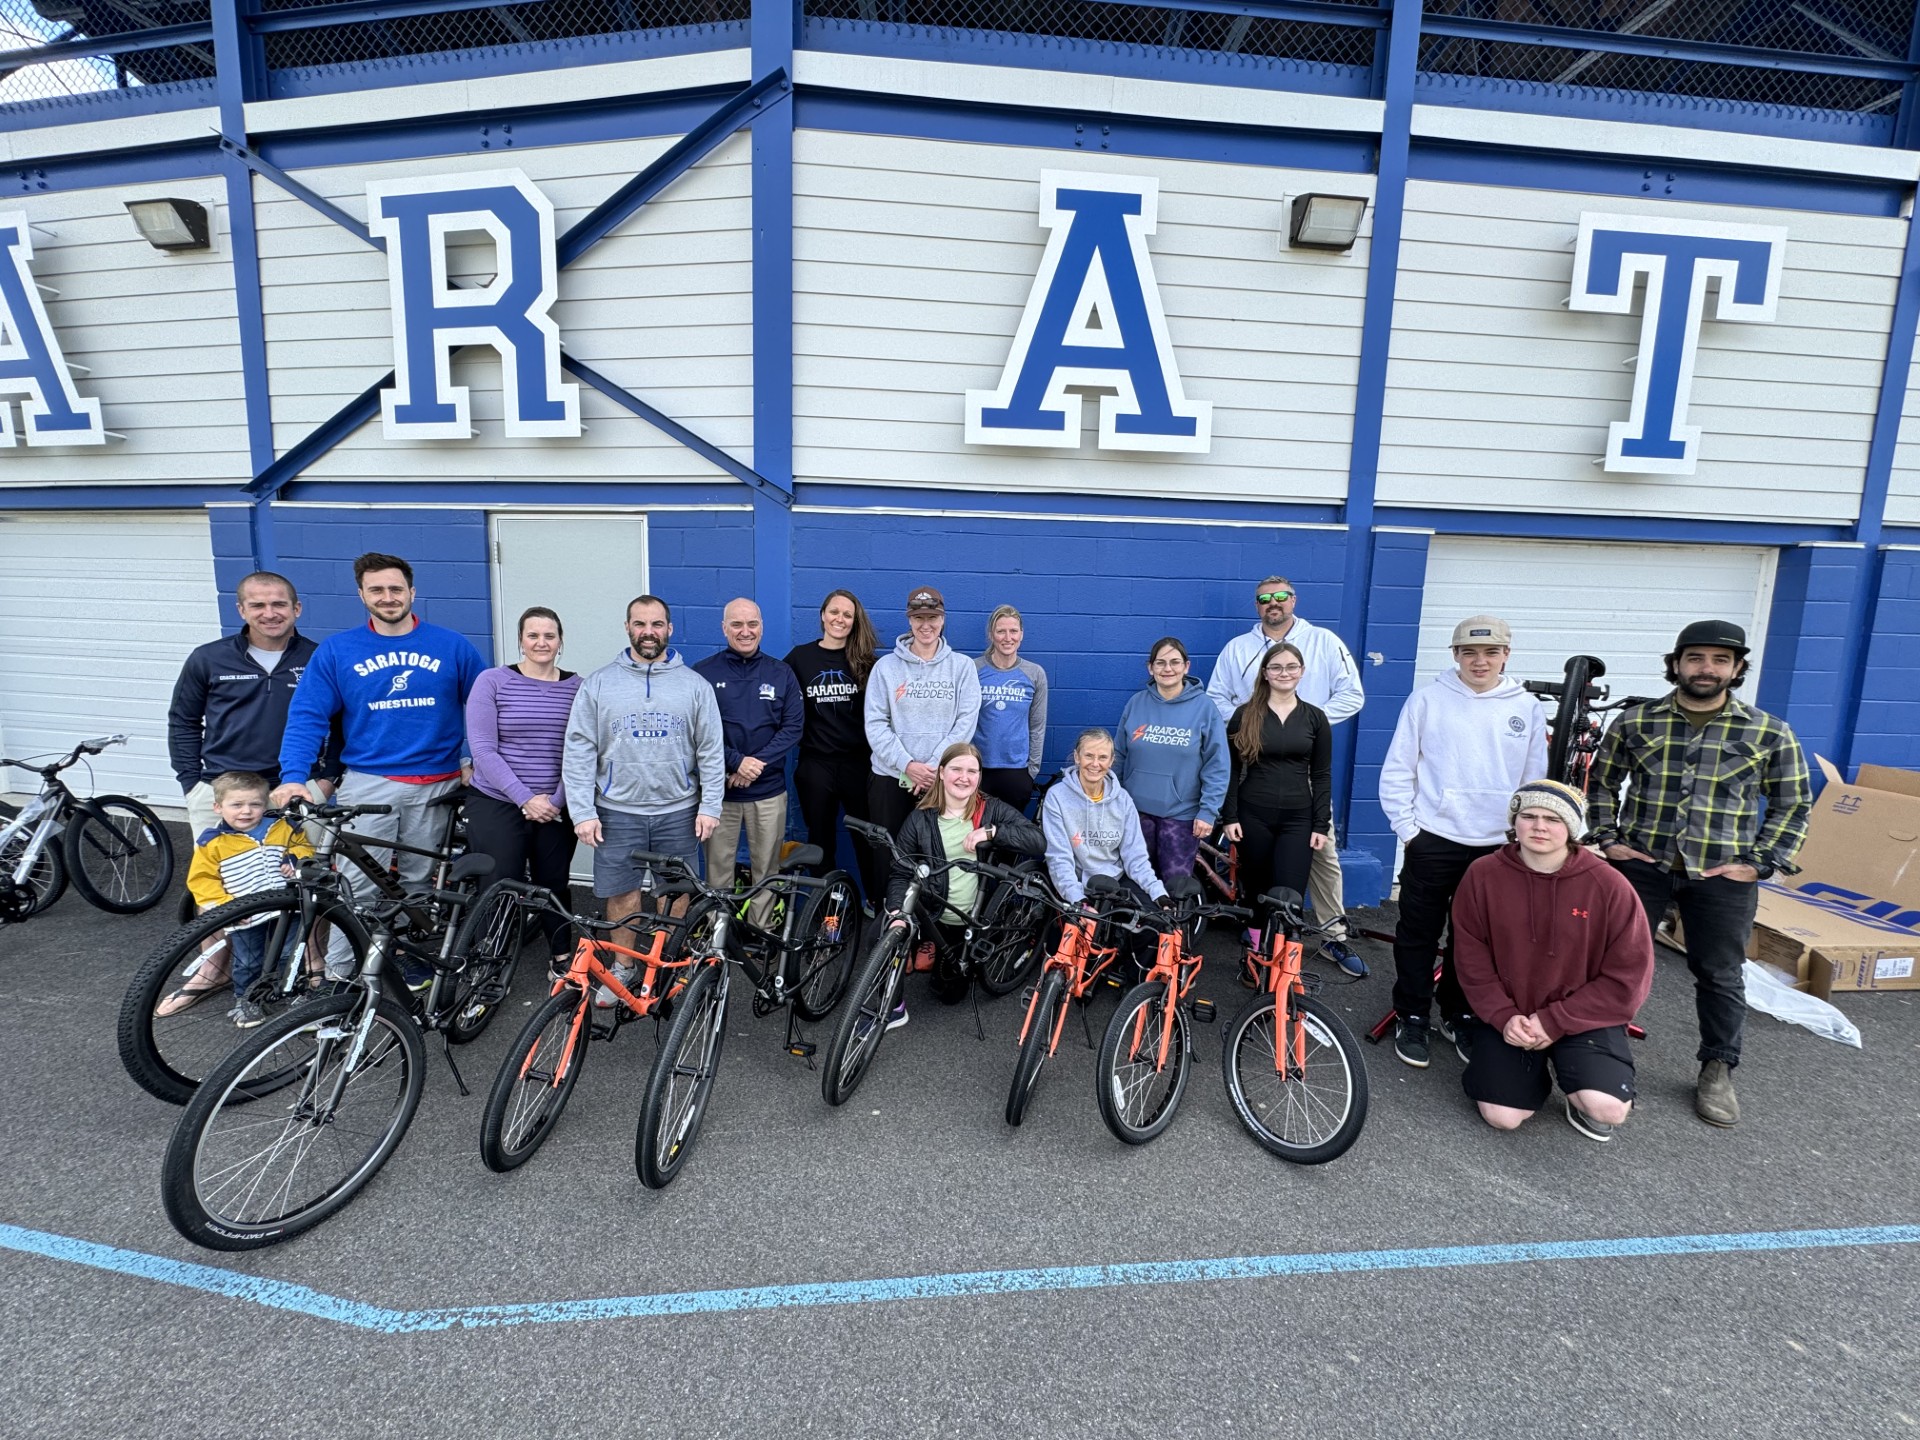 Saratoga Shredders, with Support from Saratoga County Supervisors, Launches Innovative Bikes in Schools Program for Local Elementary Students